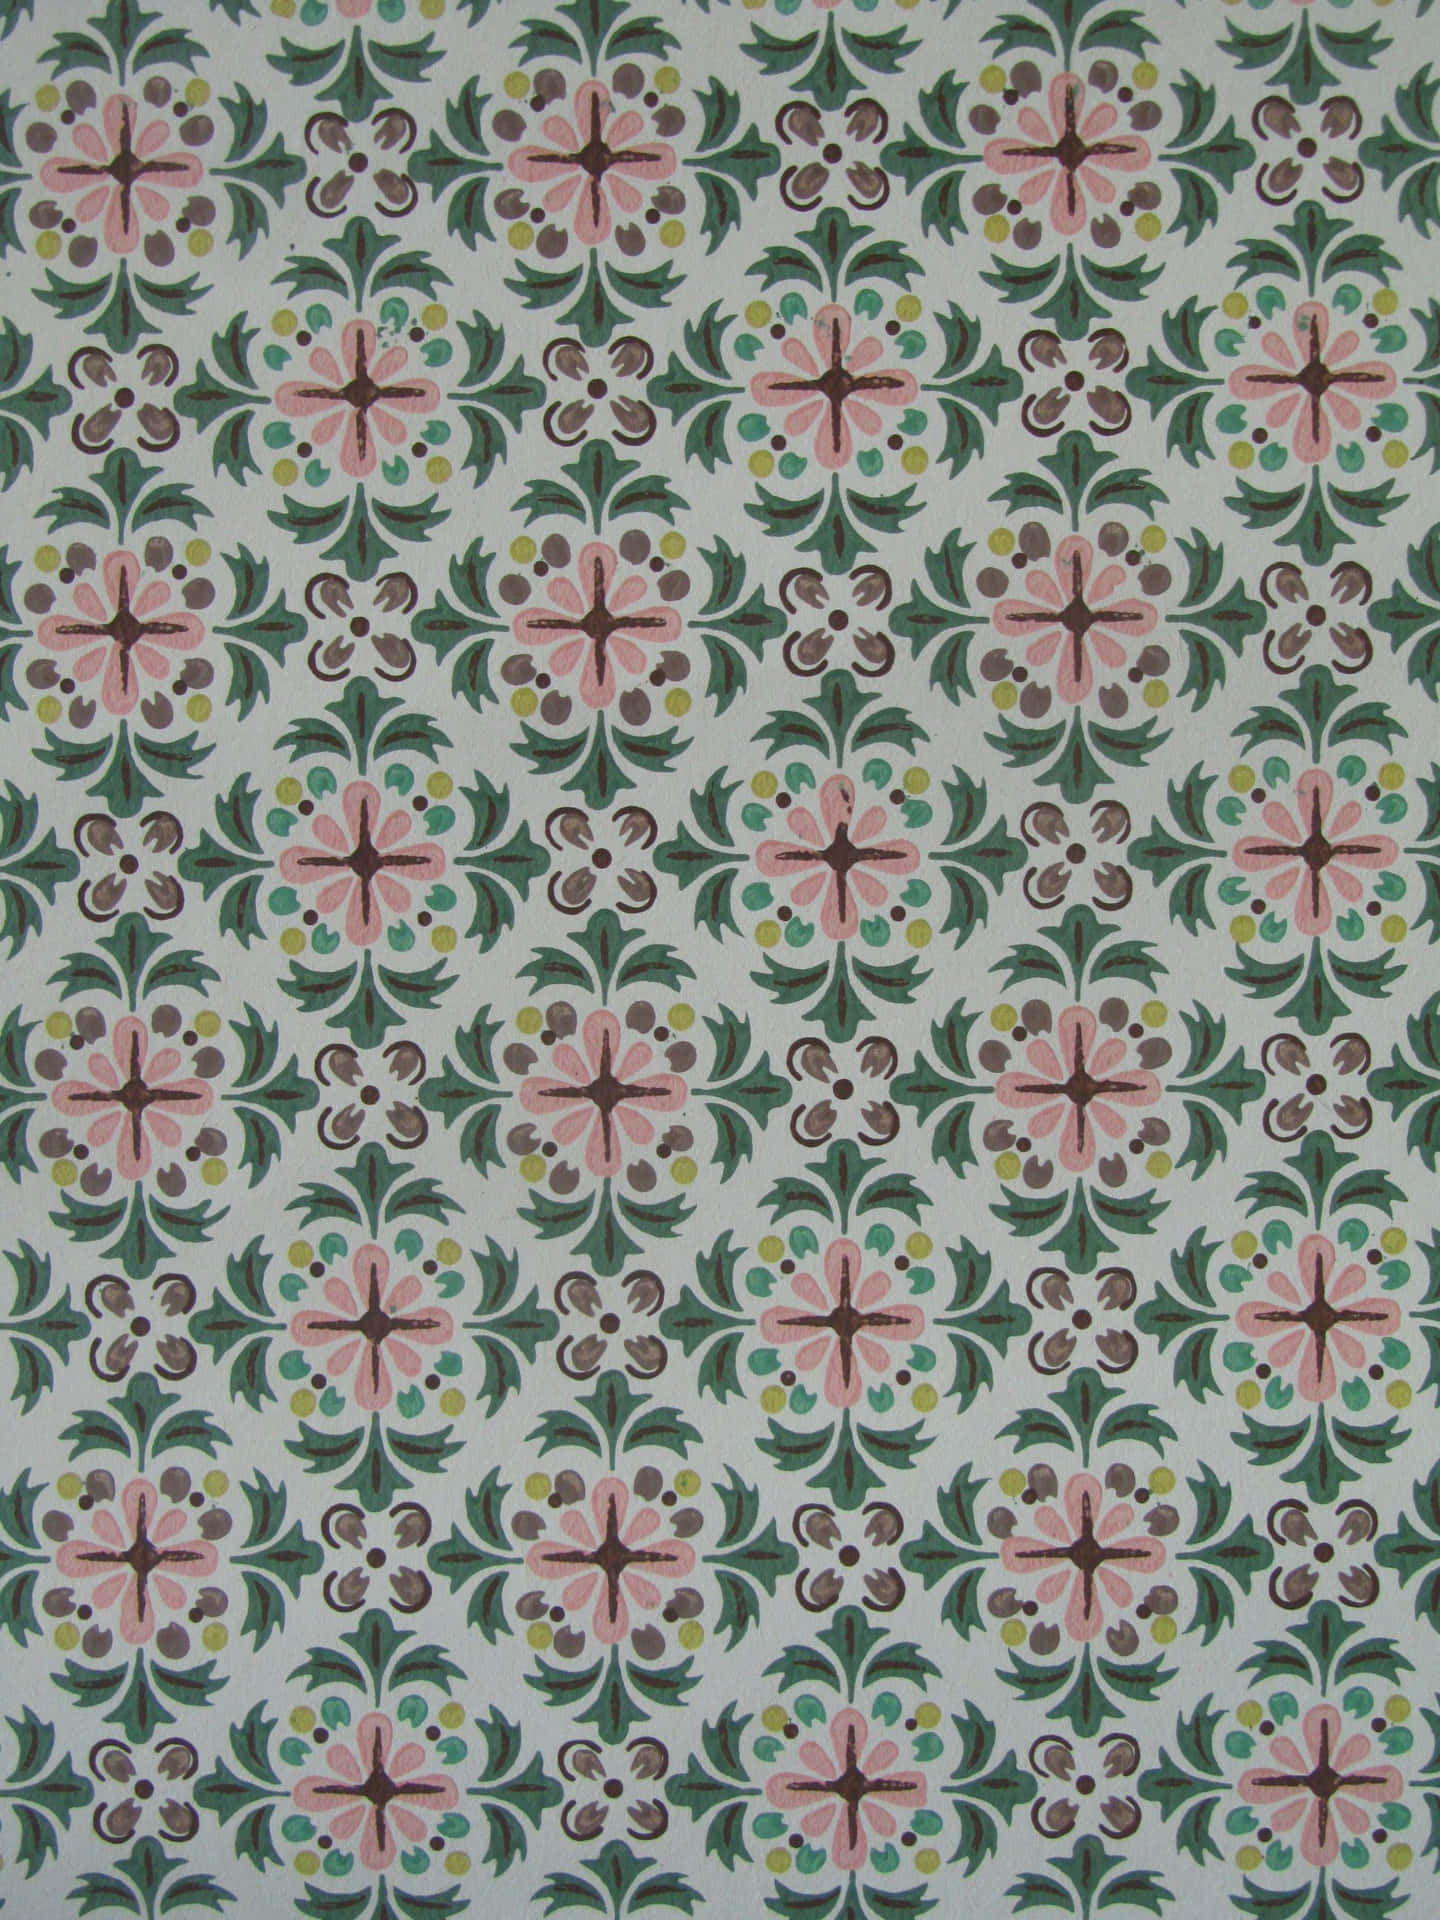 A Green And Pink Tile With Floral Designs